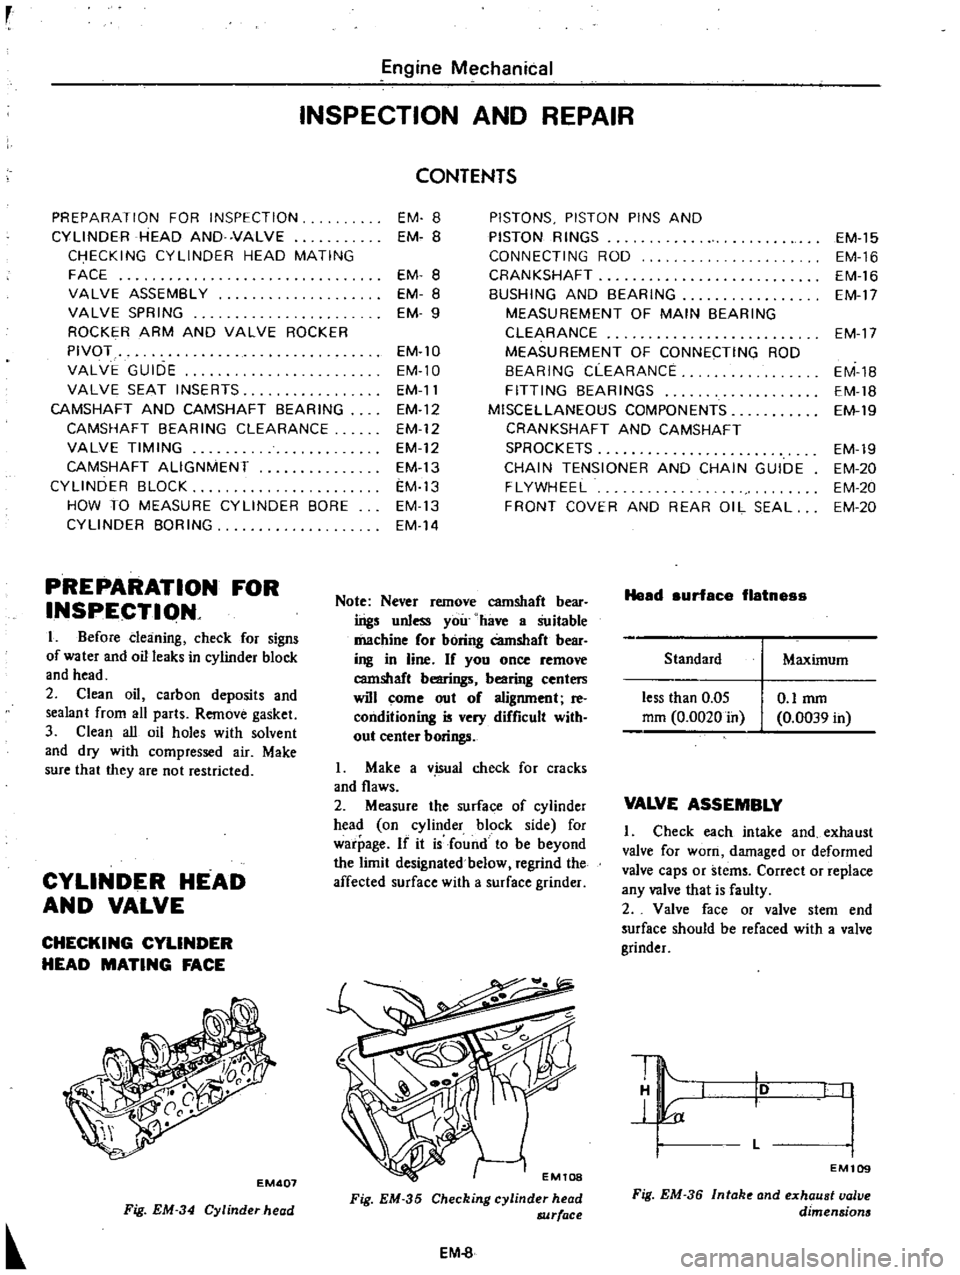 DATSUN PICK-UP 1977  Service Manual 
r

Engine 
Mechanical

INSPECTION 
AND 
REPAIR

PREPARATION 
FOR 
INSPECTION

CYLINDER 
HEAD 
AND 
VALVE

CHECKING 
CYLINDER 
HEAD 
MATING

FACE

VALVE 
ASSEMBLY

VALVE 
SPRING

ROCKER 
ARM 
AND 
VAL